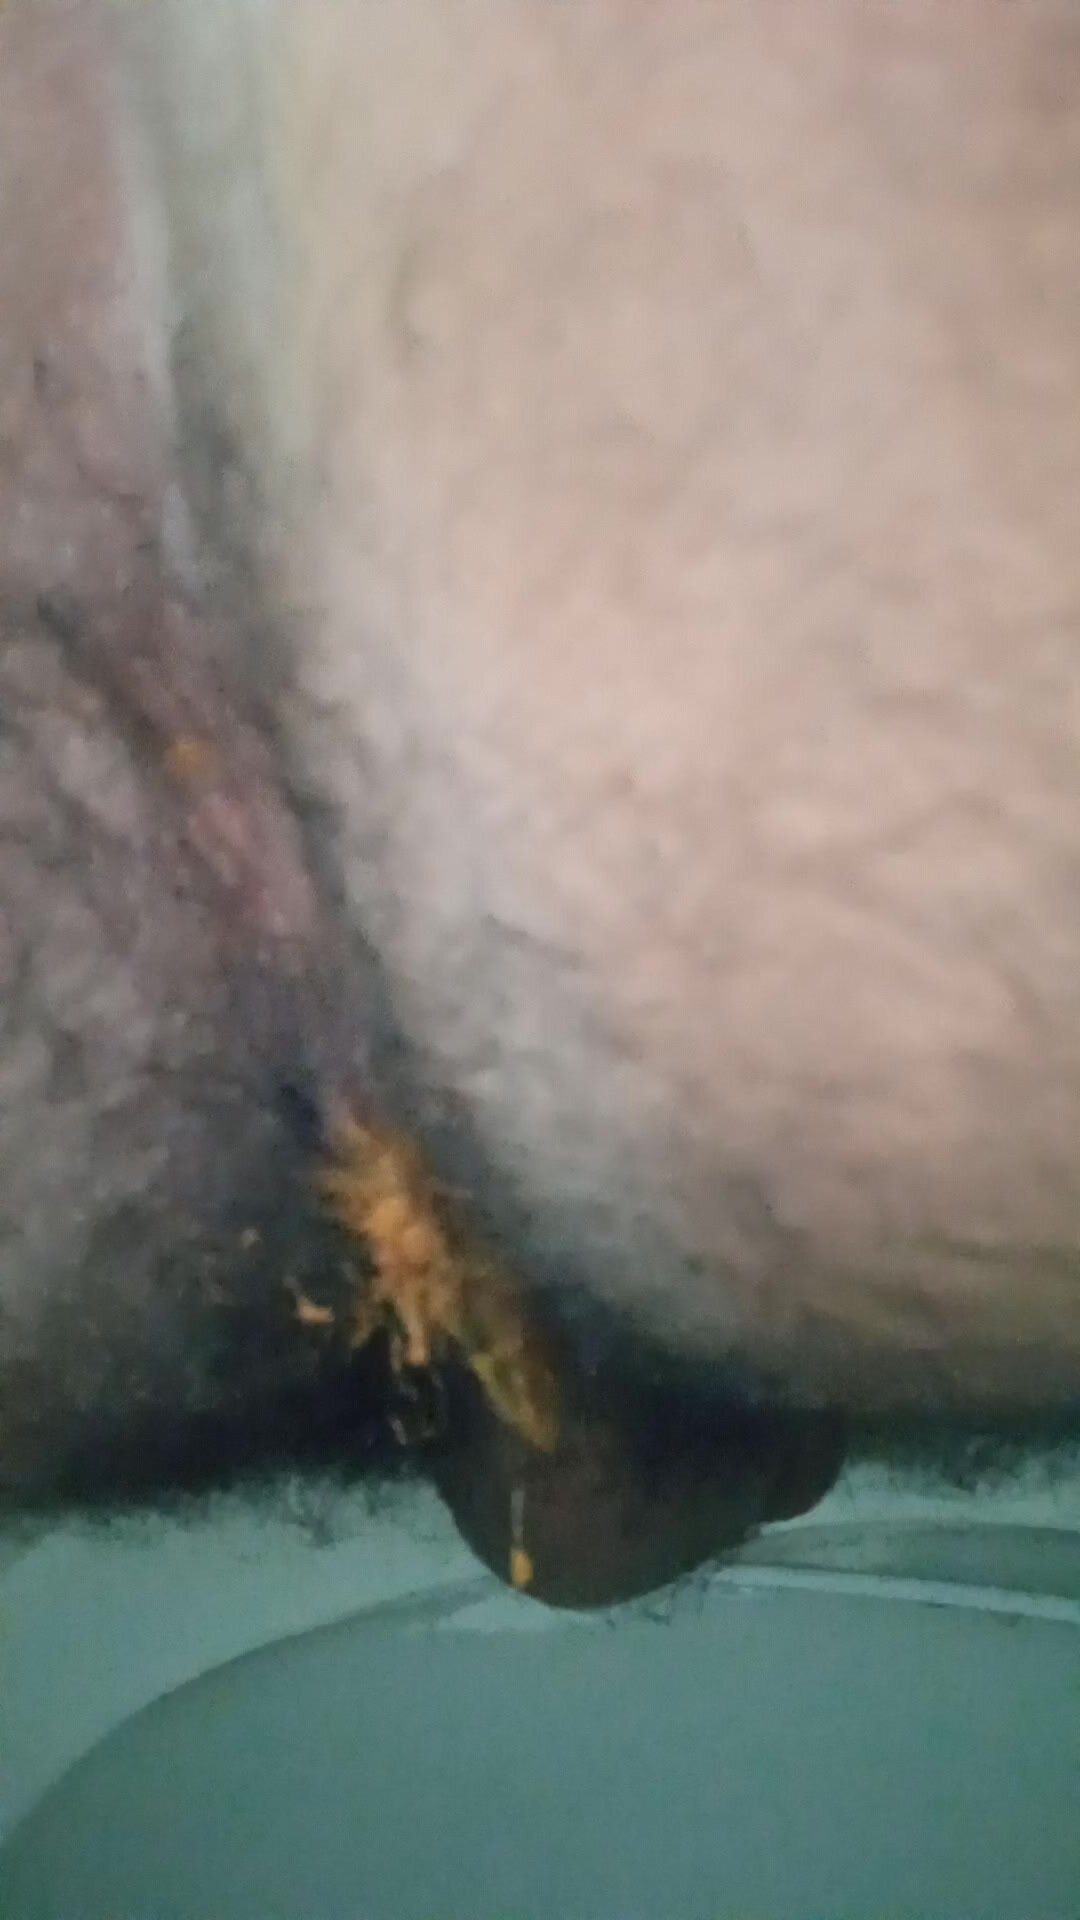 Runny shit at work - video 3